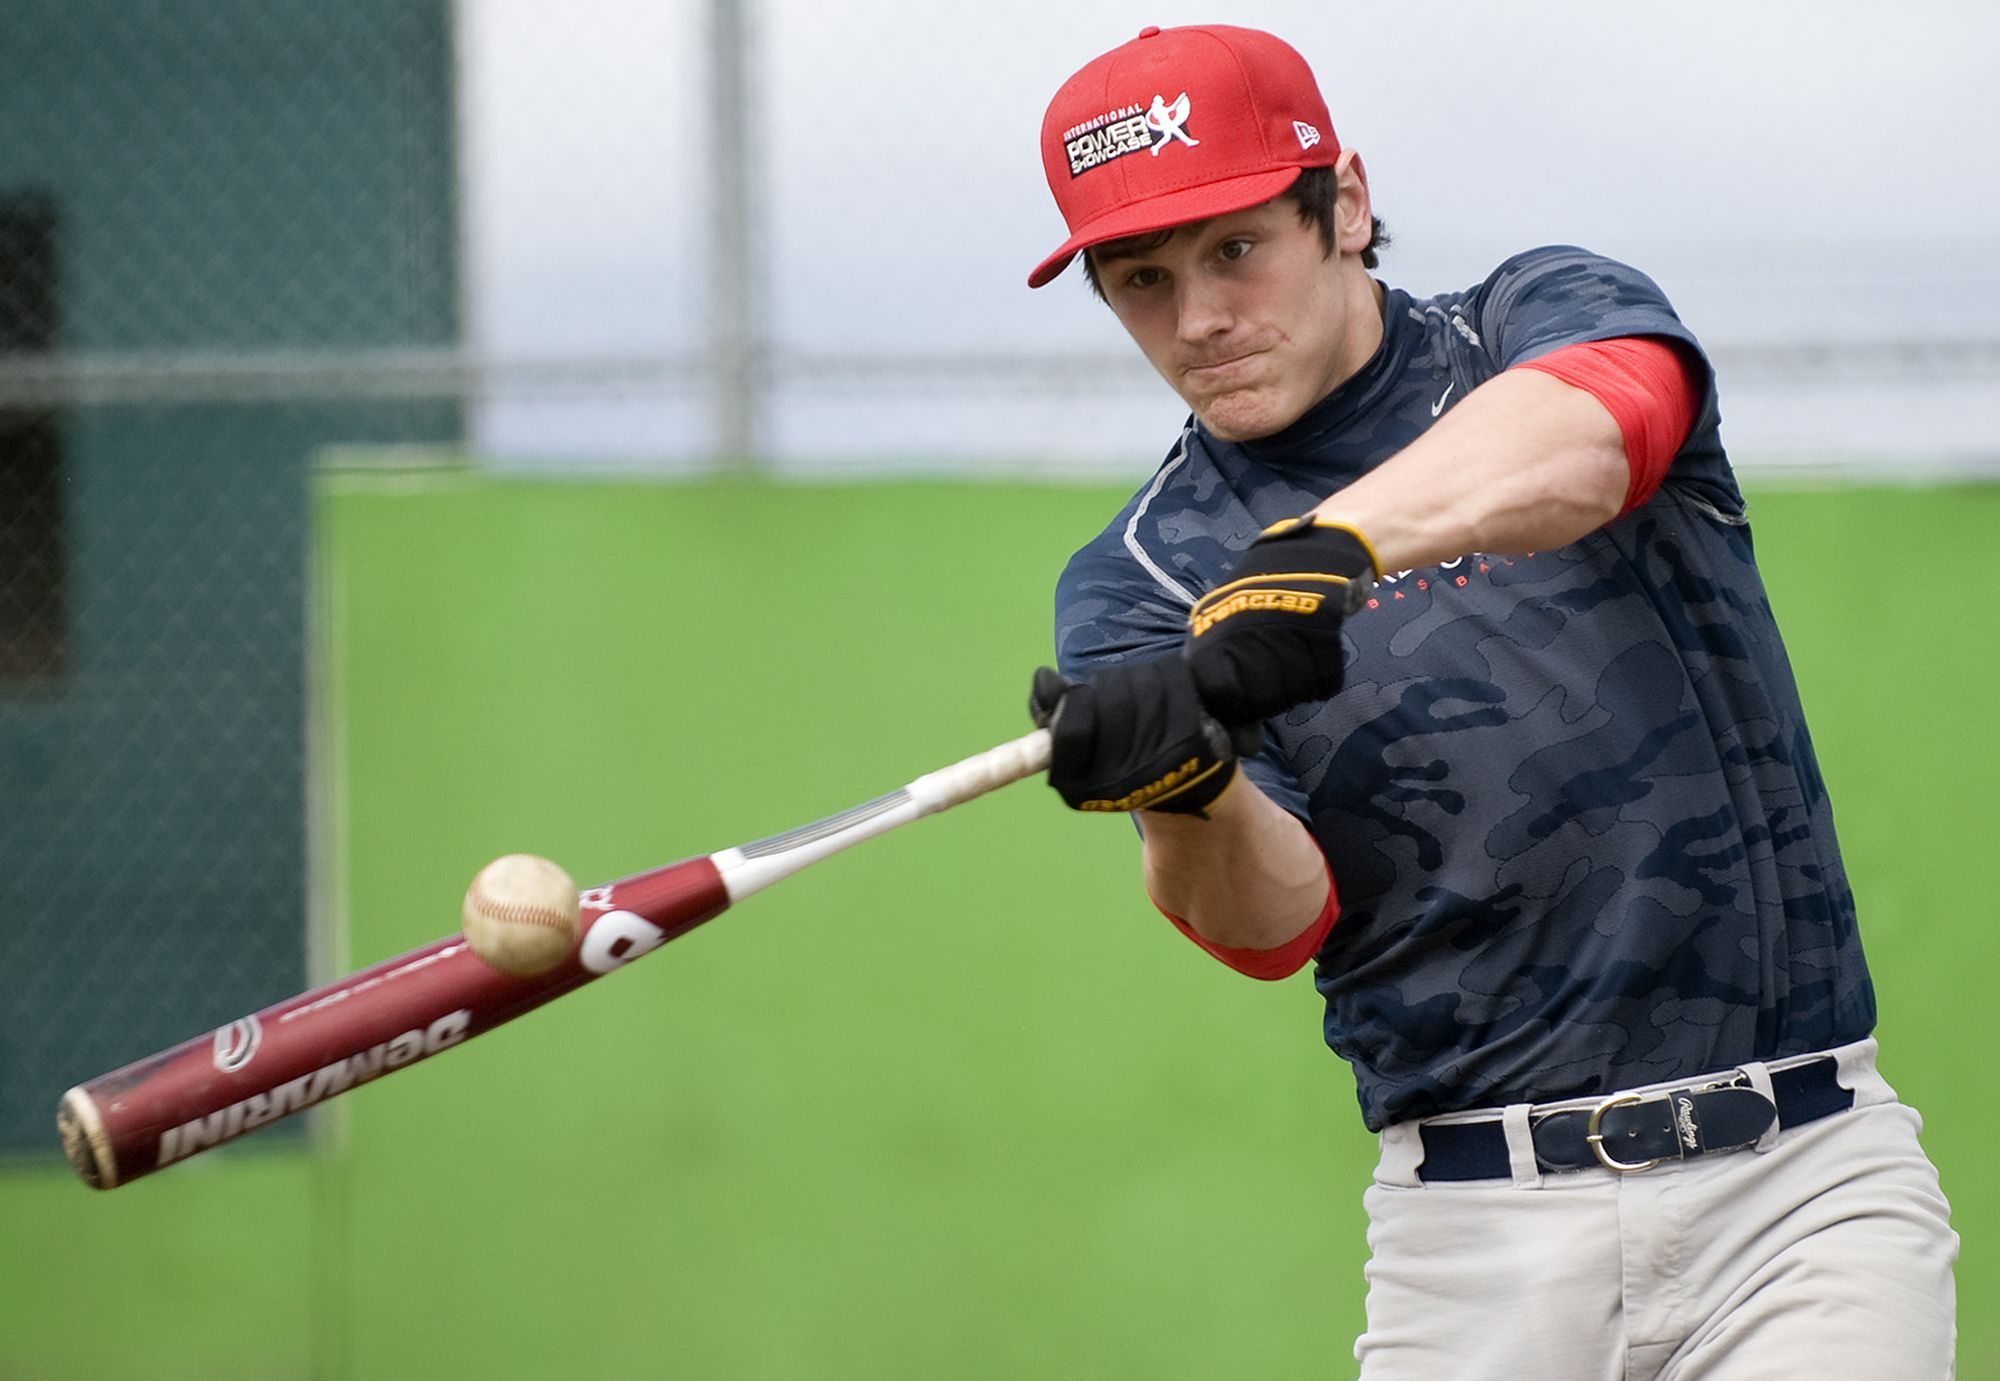 Clint Coulter, a senior-to-be at Union High School, will be on national television Saturday morning, playing in the 2011 Under Armour All-America Game at Wrigley Field in Chicago.